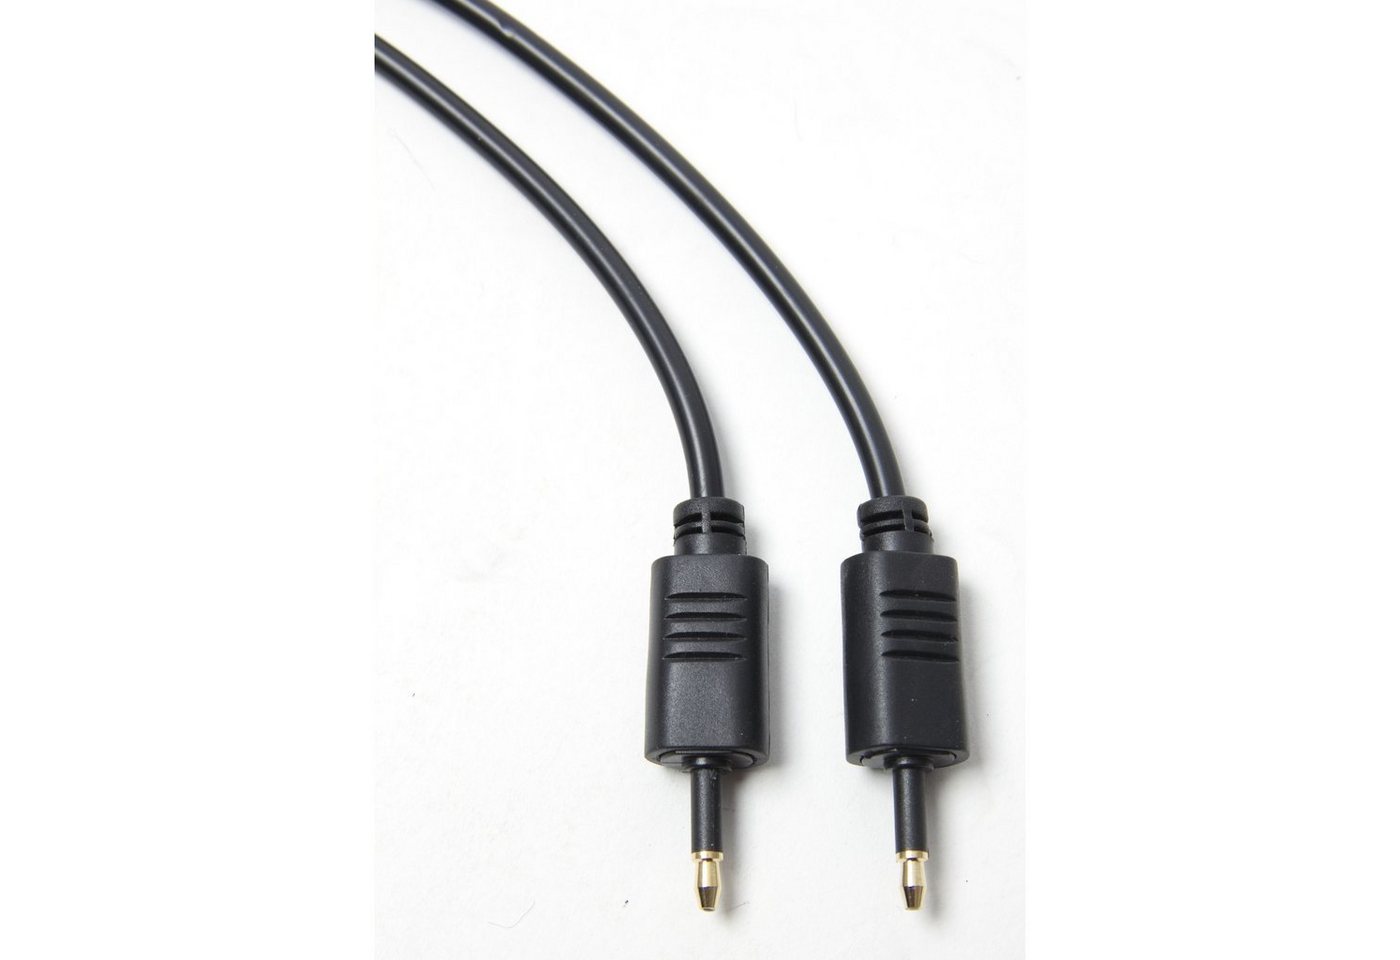 MUSIC STORE Audio-Kabel, Optical Cable, High-Quality, Flexible von MUSIC STORE